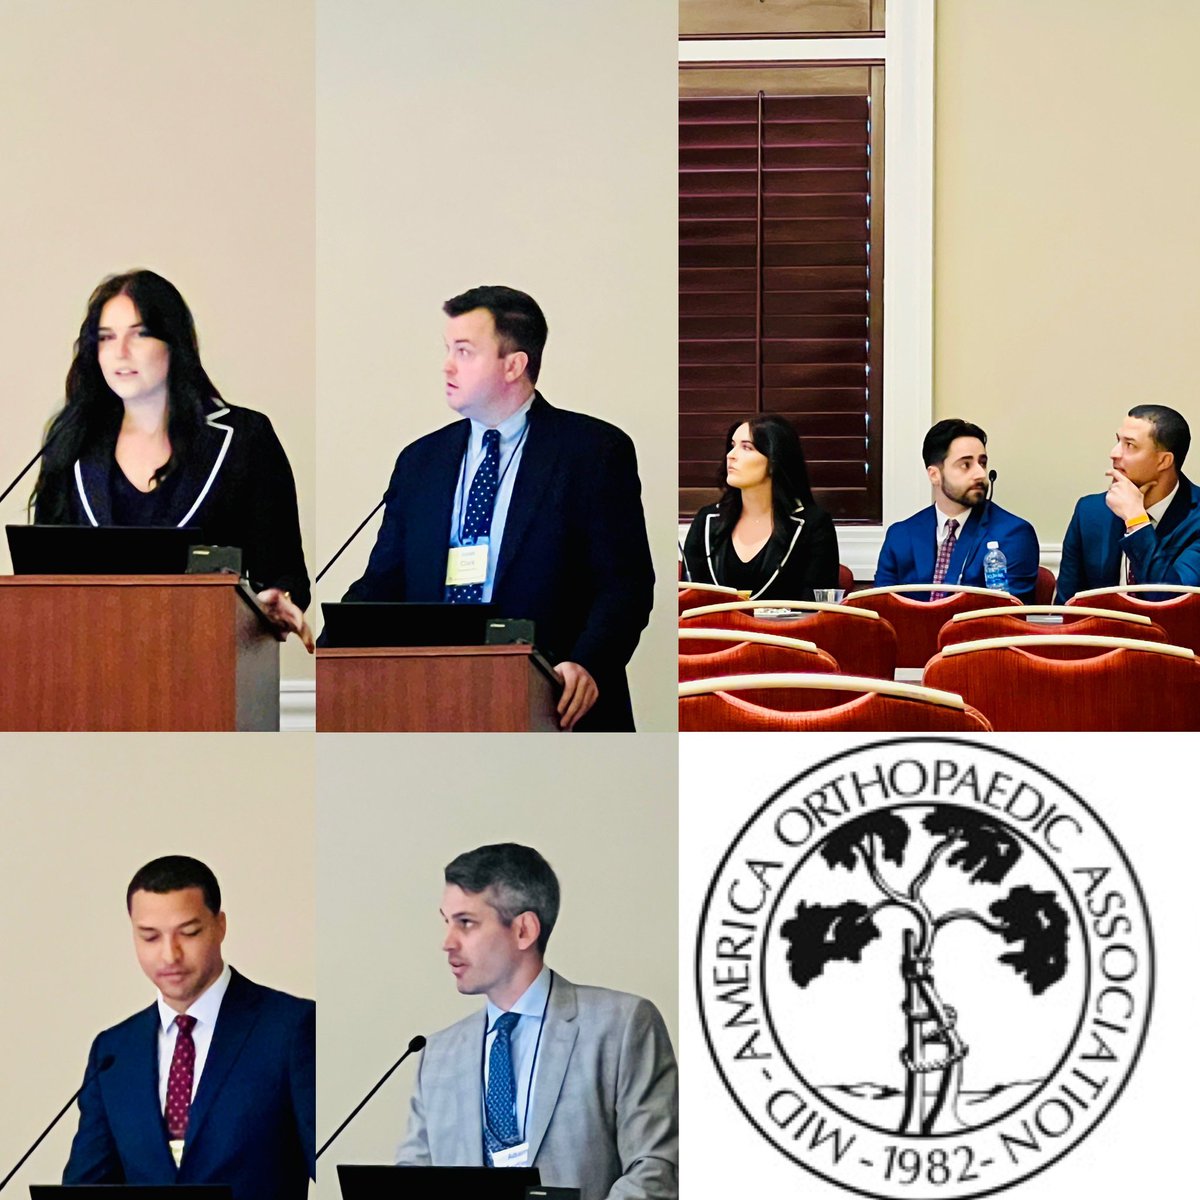 Great second Sport session at #MAOA spanning from shoulder, to hip, to knee and patellofemoral. Great to watch research fellows, residents, and colleagues #RockingIt from the podium.